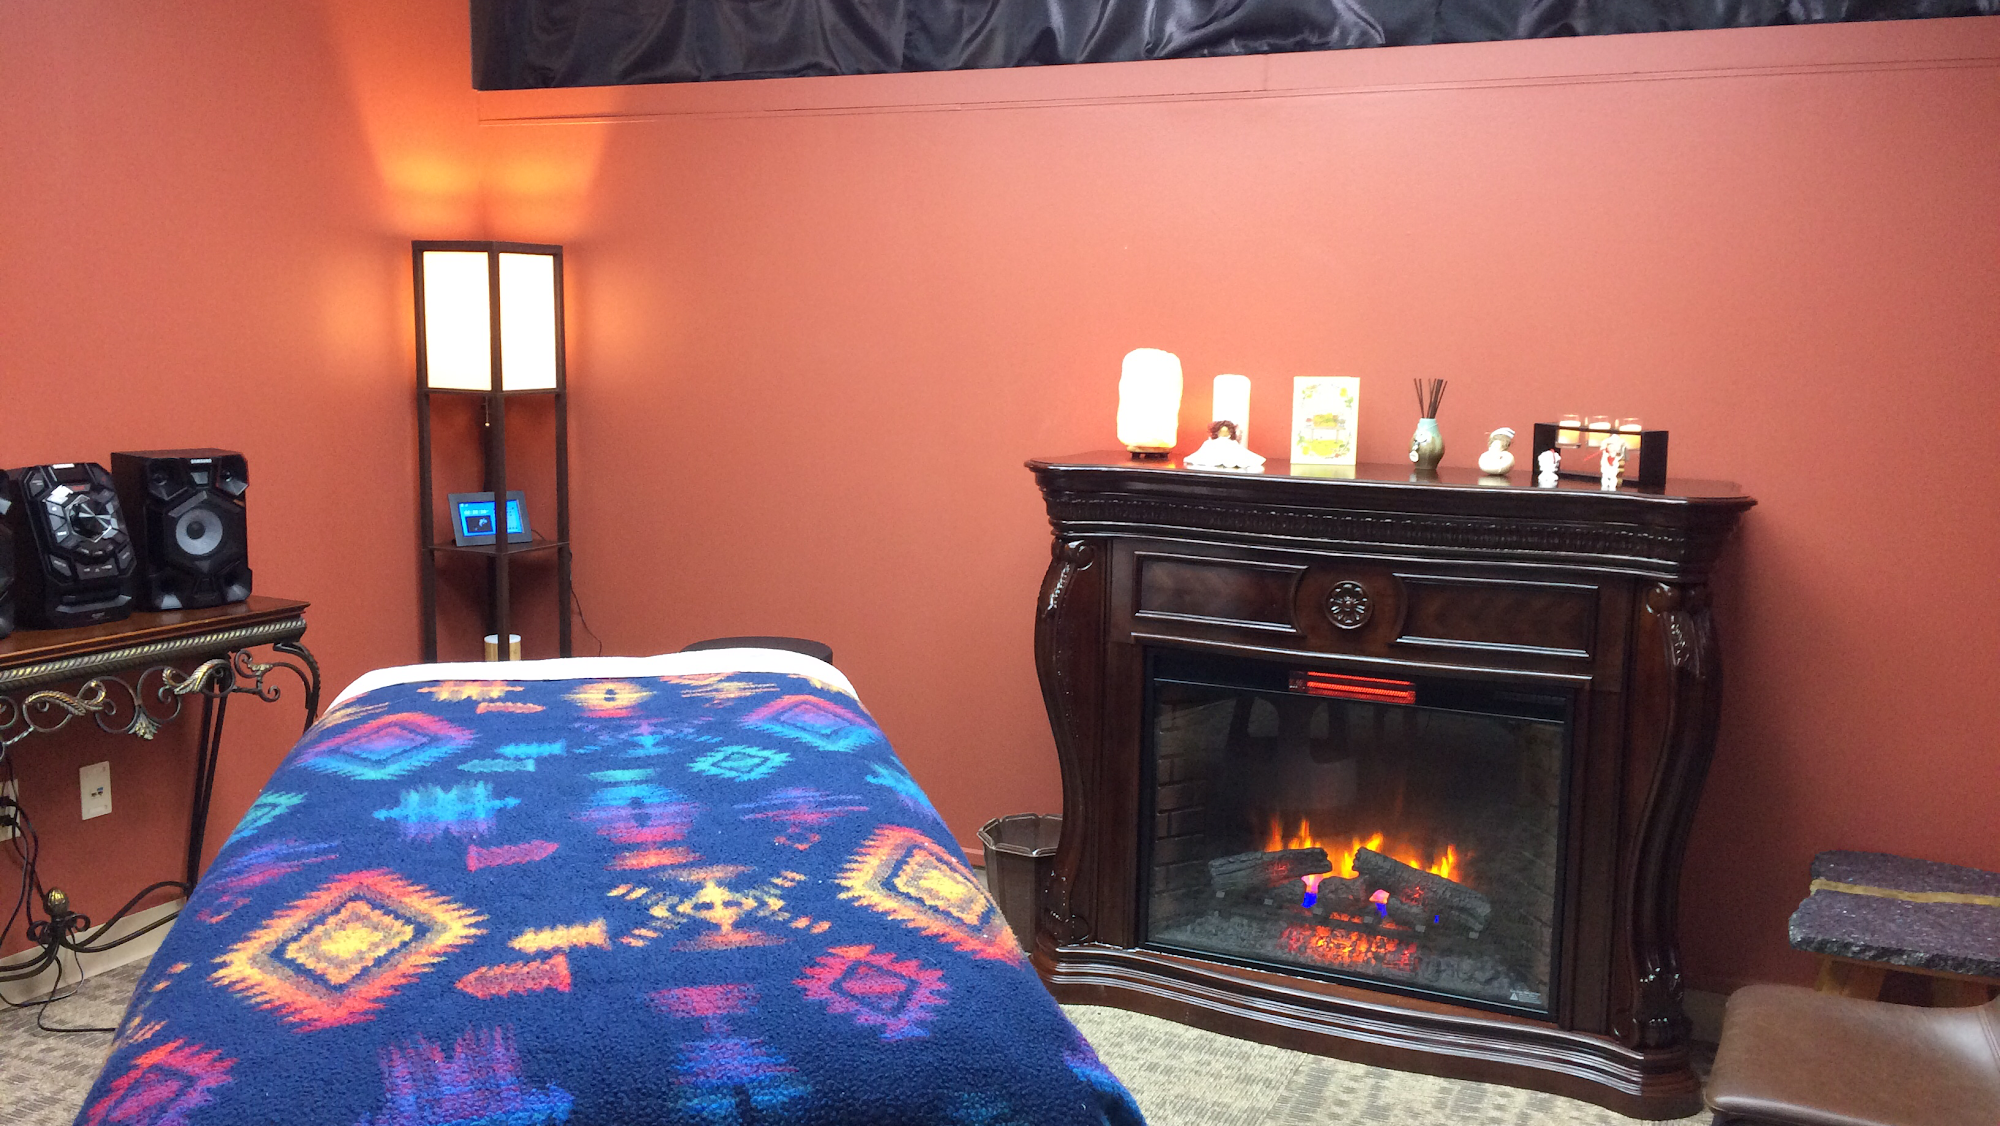 Rejuvenation Massage and Cryotherapy Wellness Spa